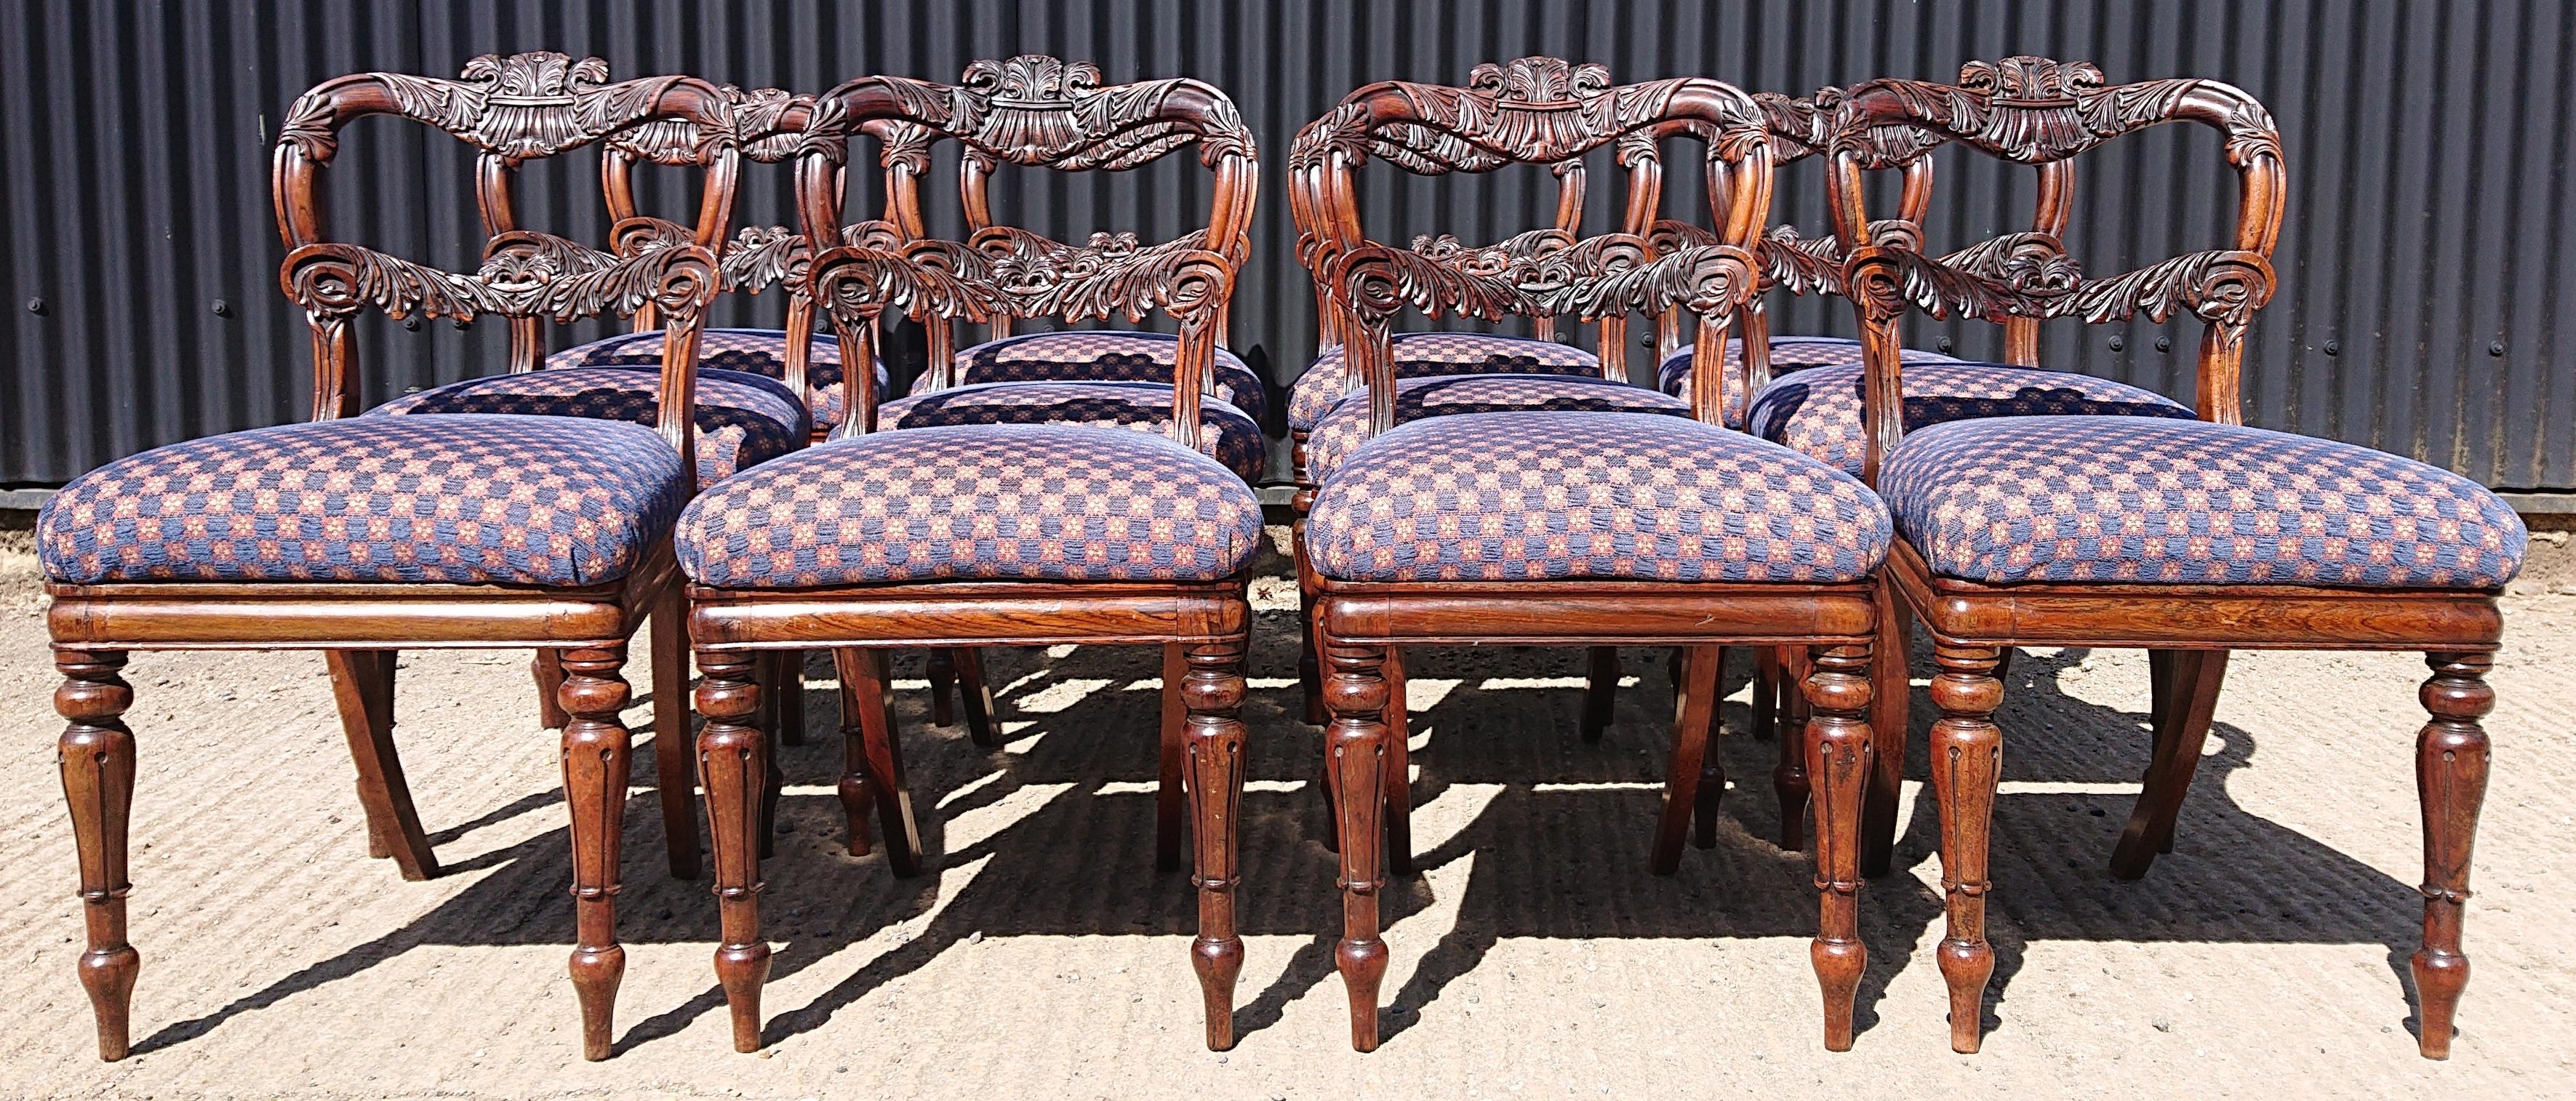 A very fine quality set of 19th century dining chairs made by Gillow of Lancaster and London. These chairs are made from a beautiful cut of gonçalo alves timber and they have a generous shape to the back rest, a deep sweep to the back legs and crisp